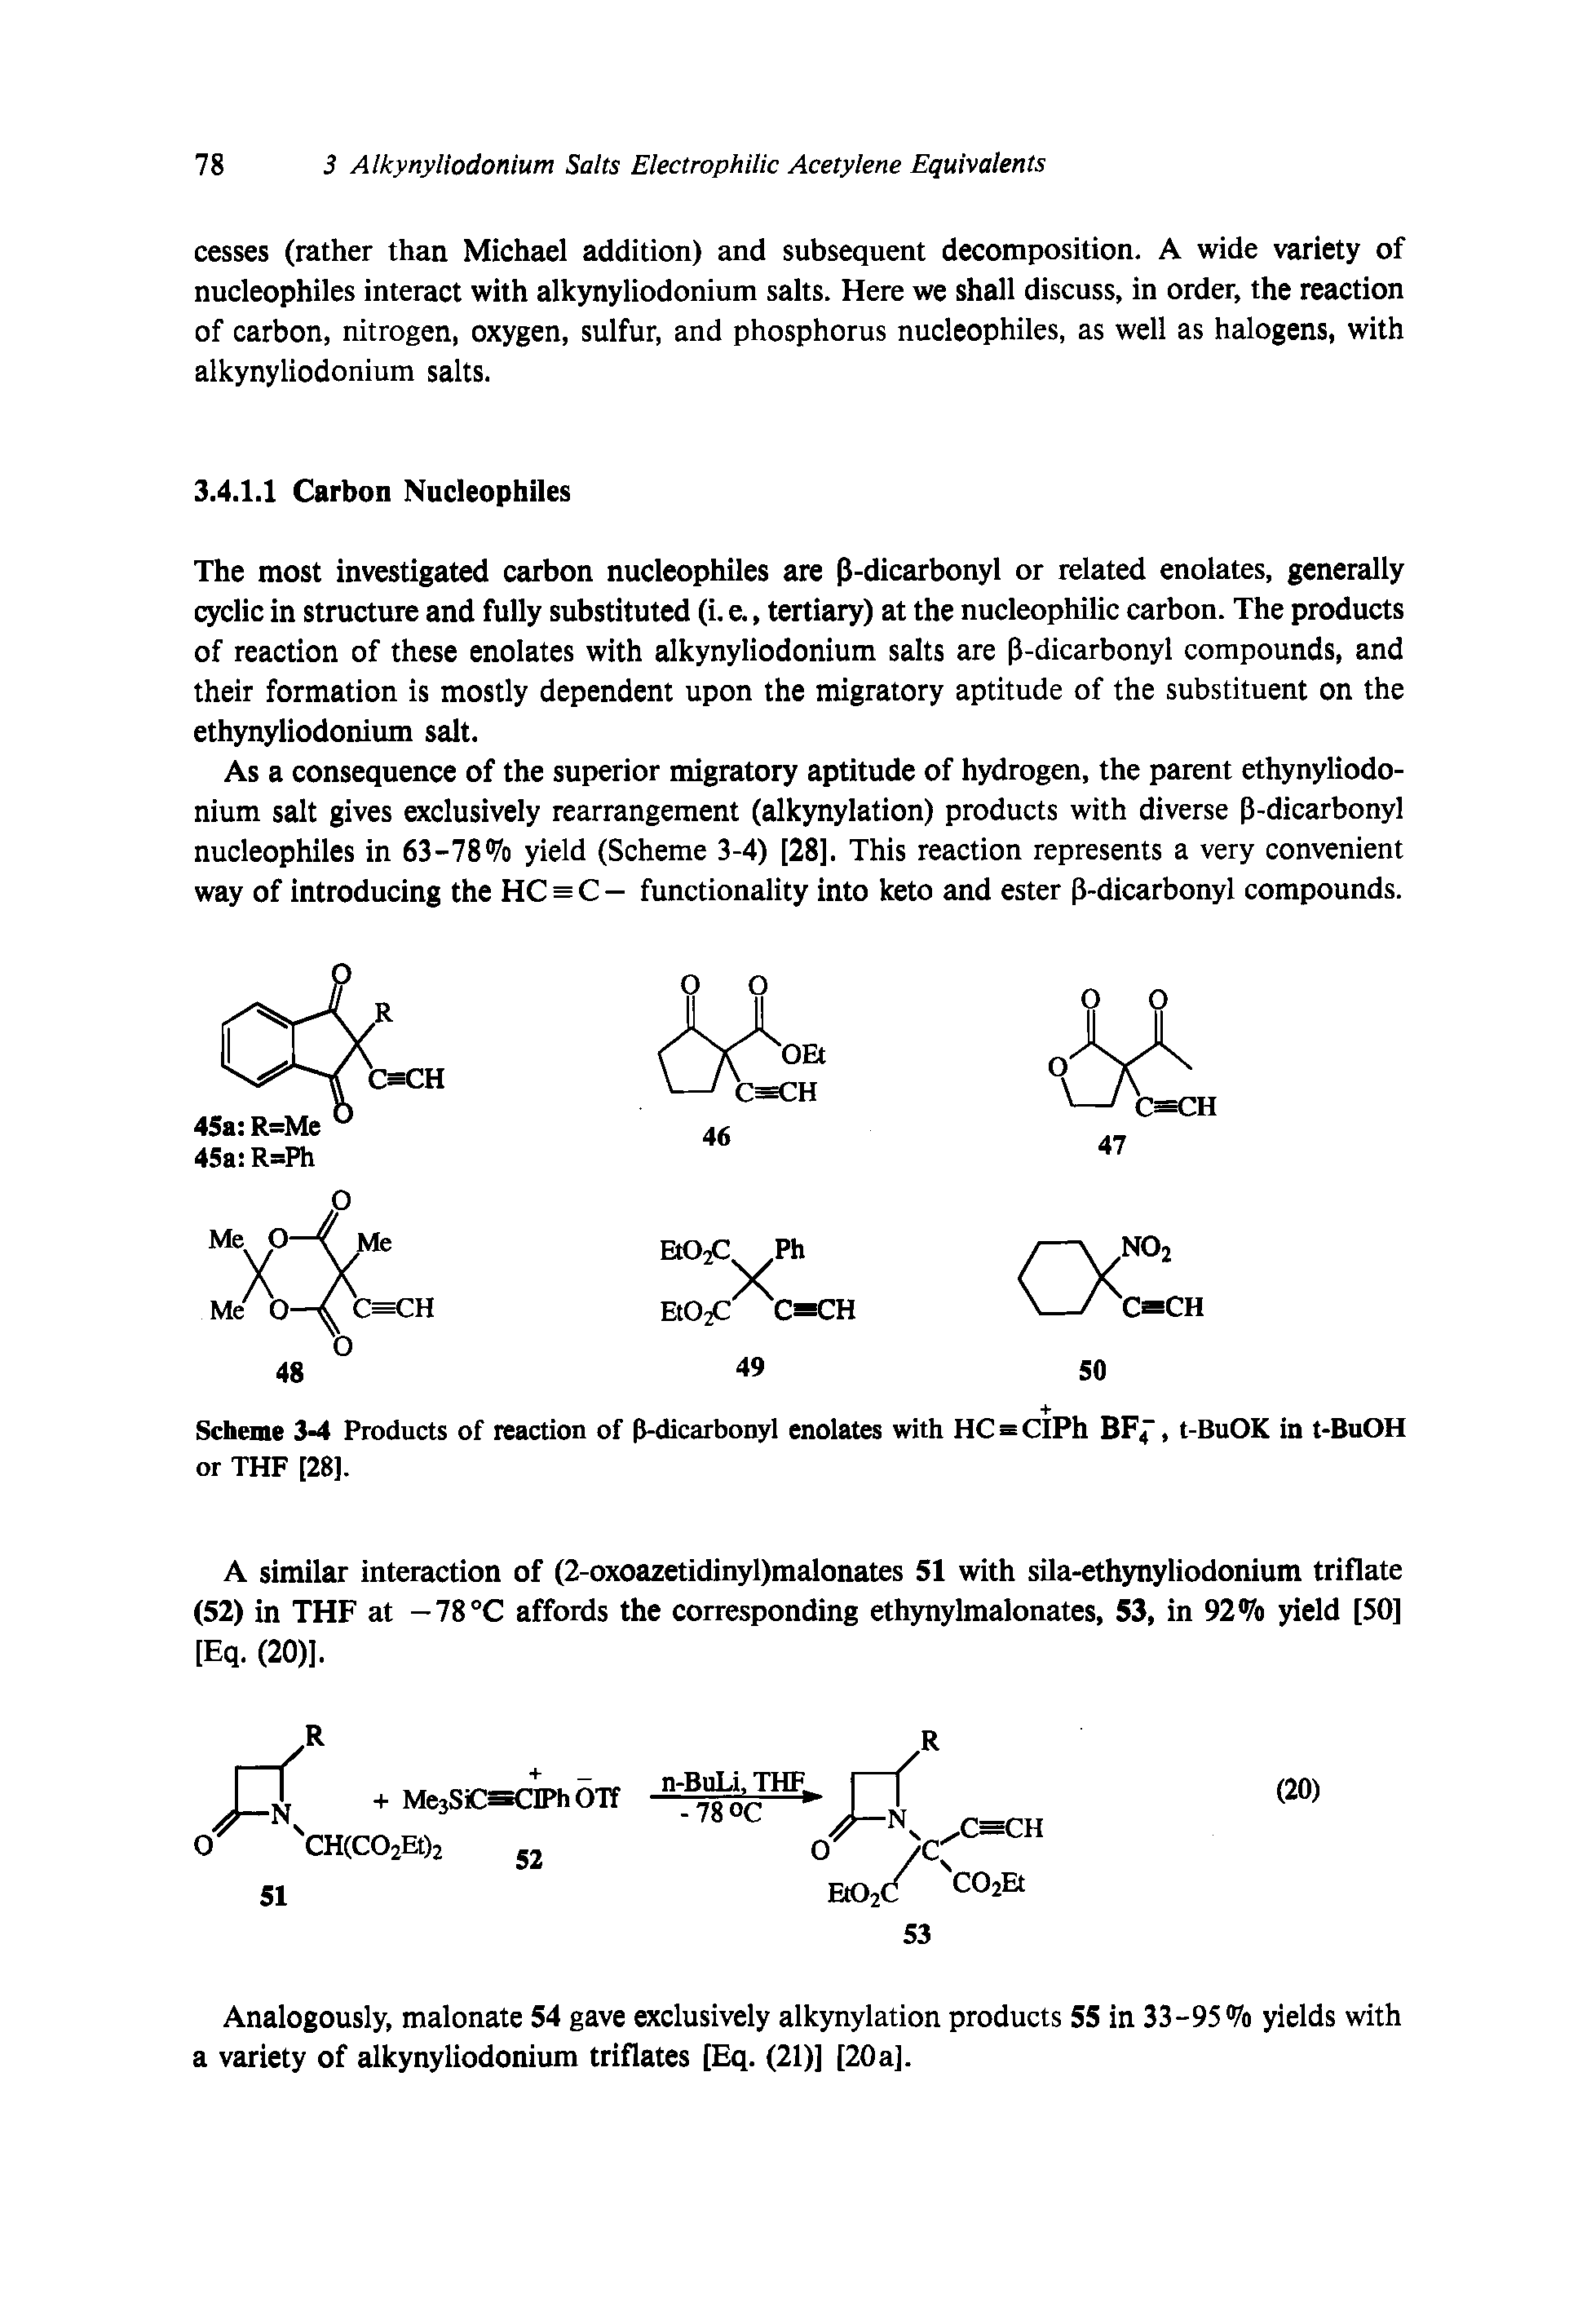 Scheme 3-4 Products of reaction of p-dicarbonyl enolates with HCsCiPh BF, t-BuOK in t-BuOH or THF [28].